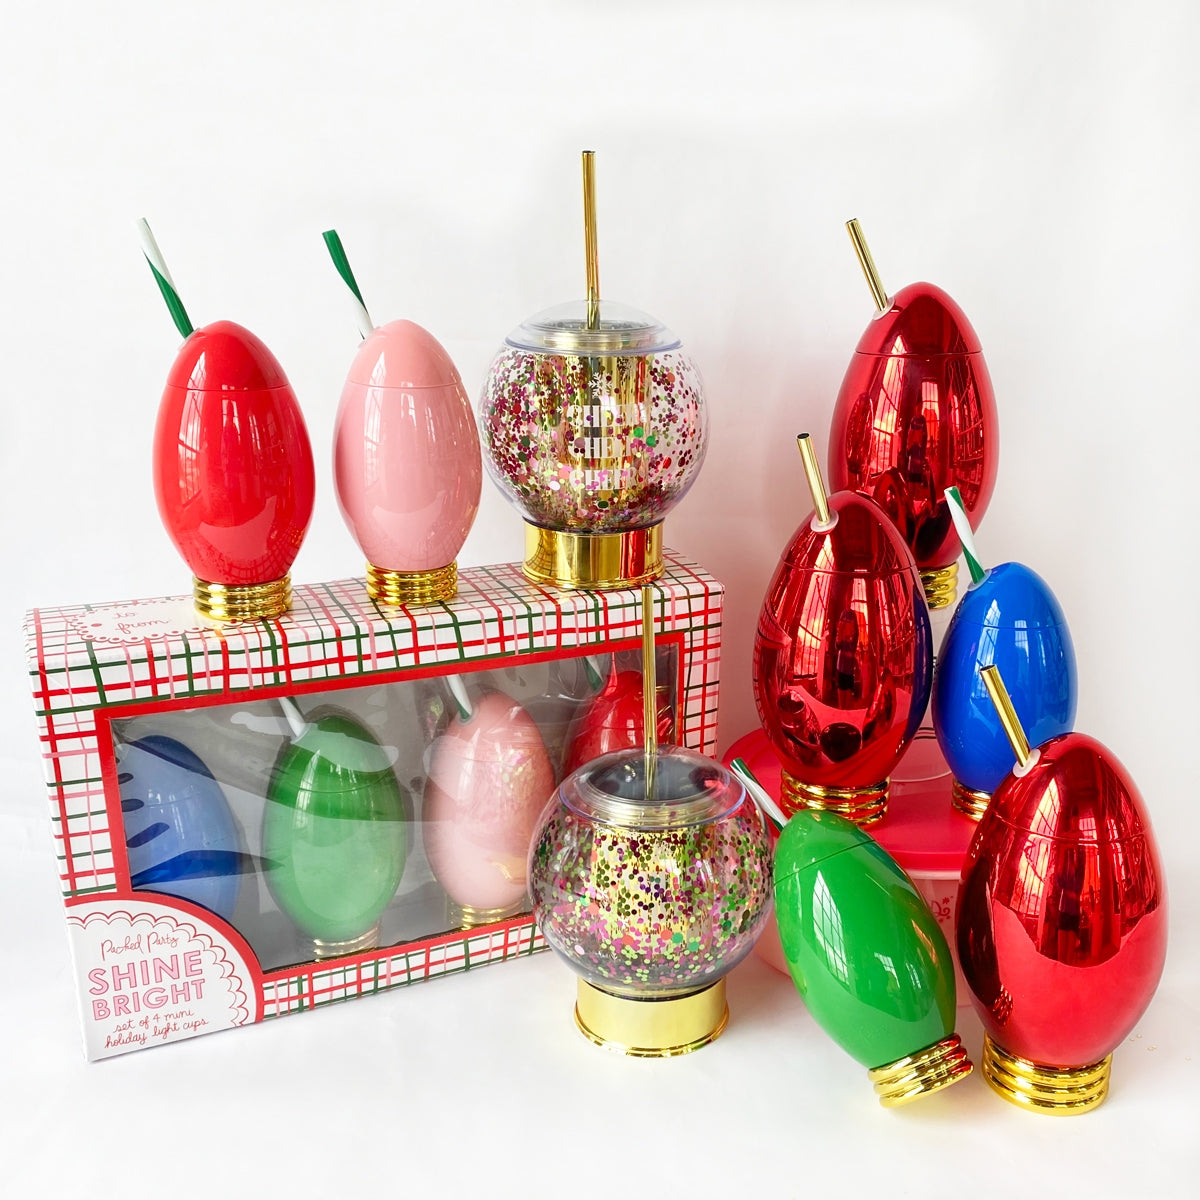 Packed Party Holiday Light Cup